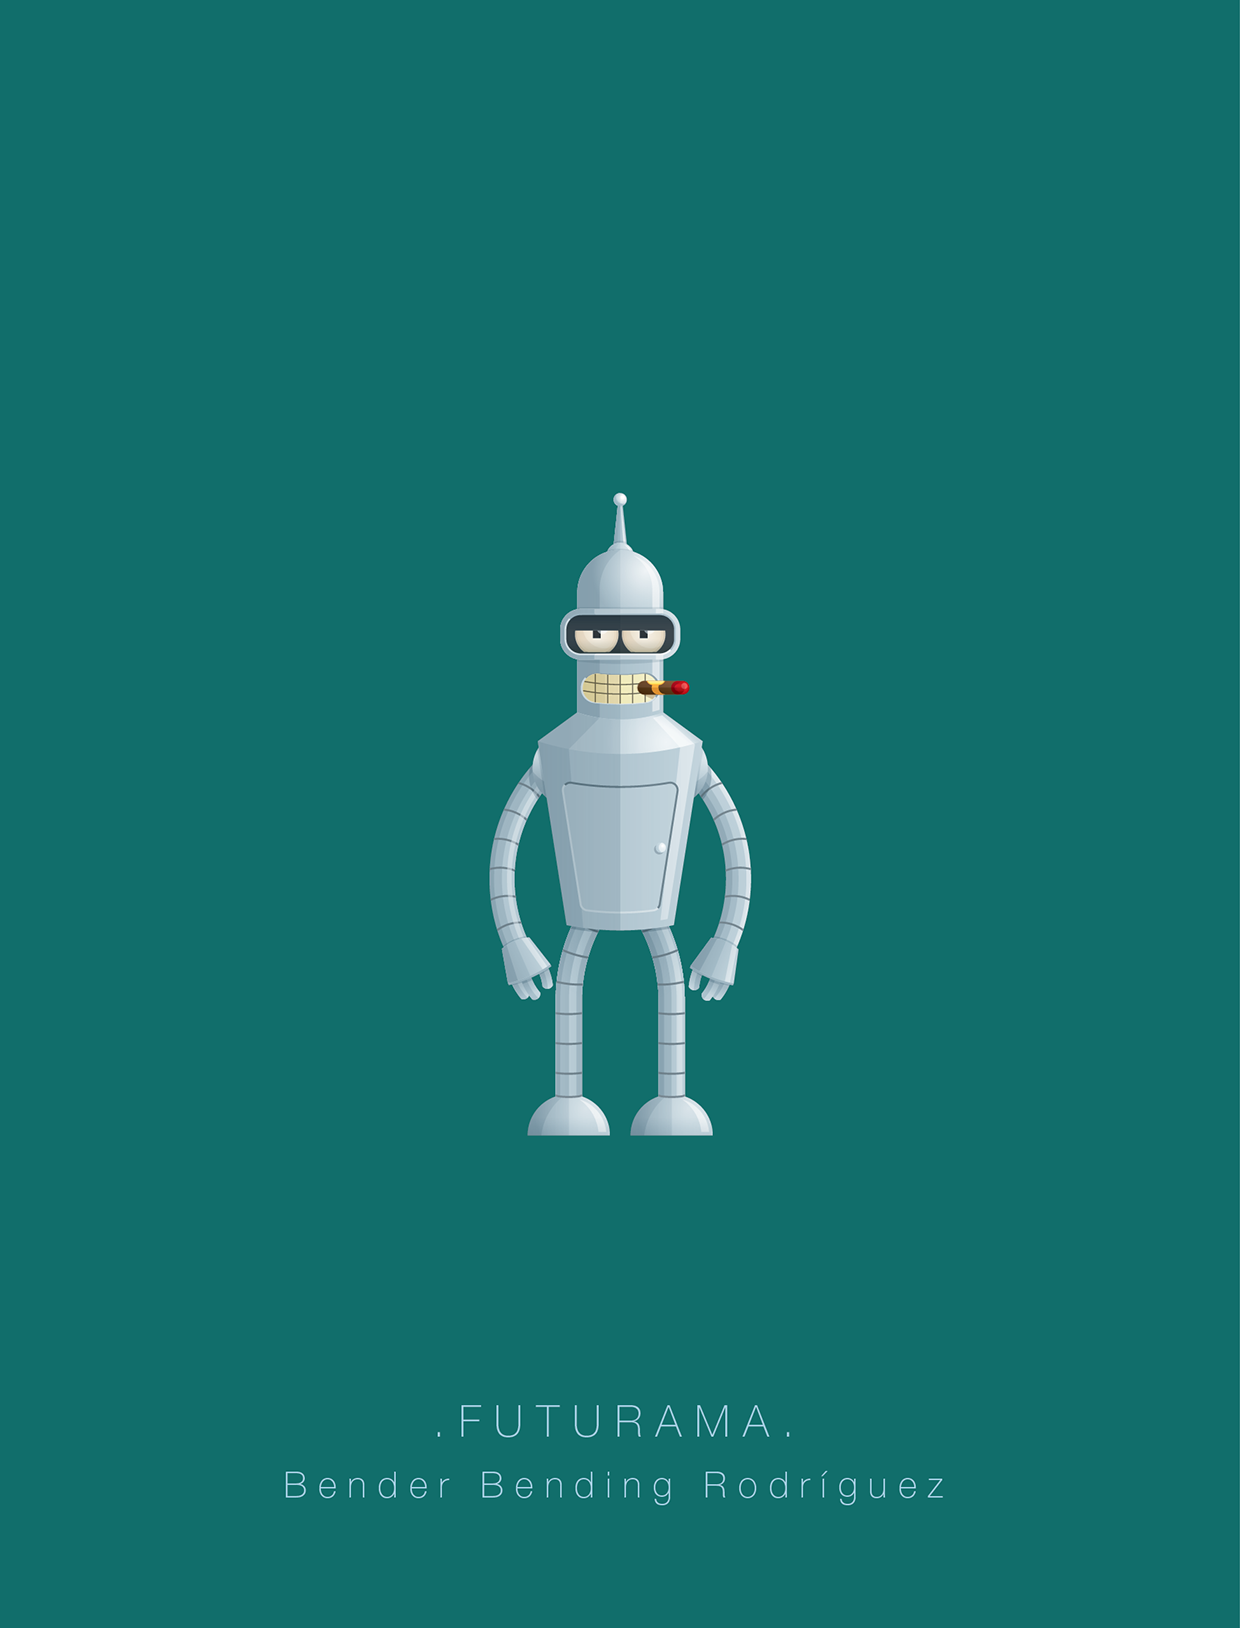 Famous Robots by Frederico Birchal